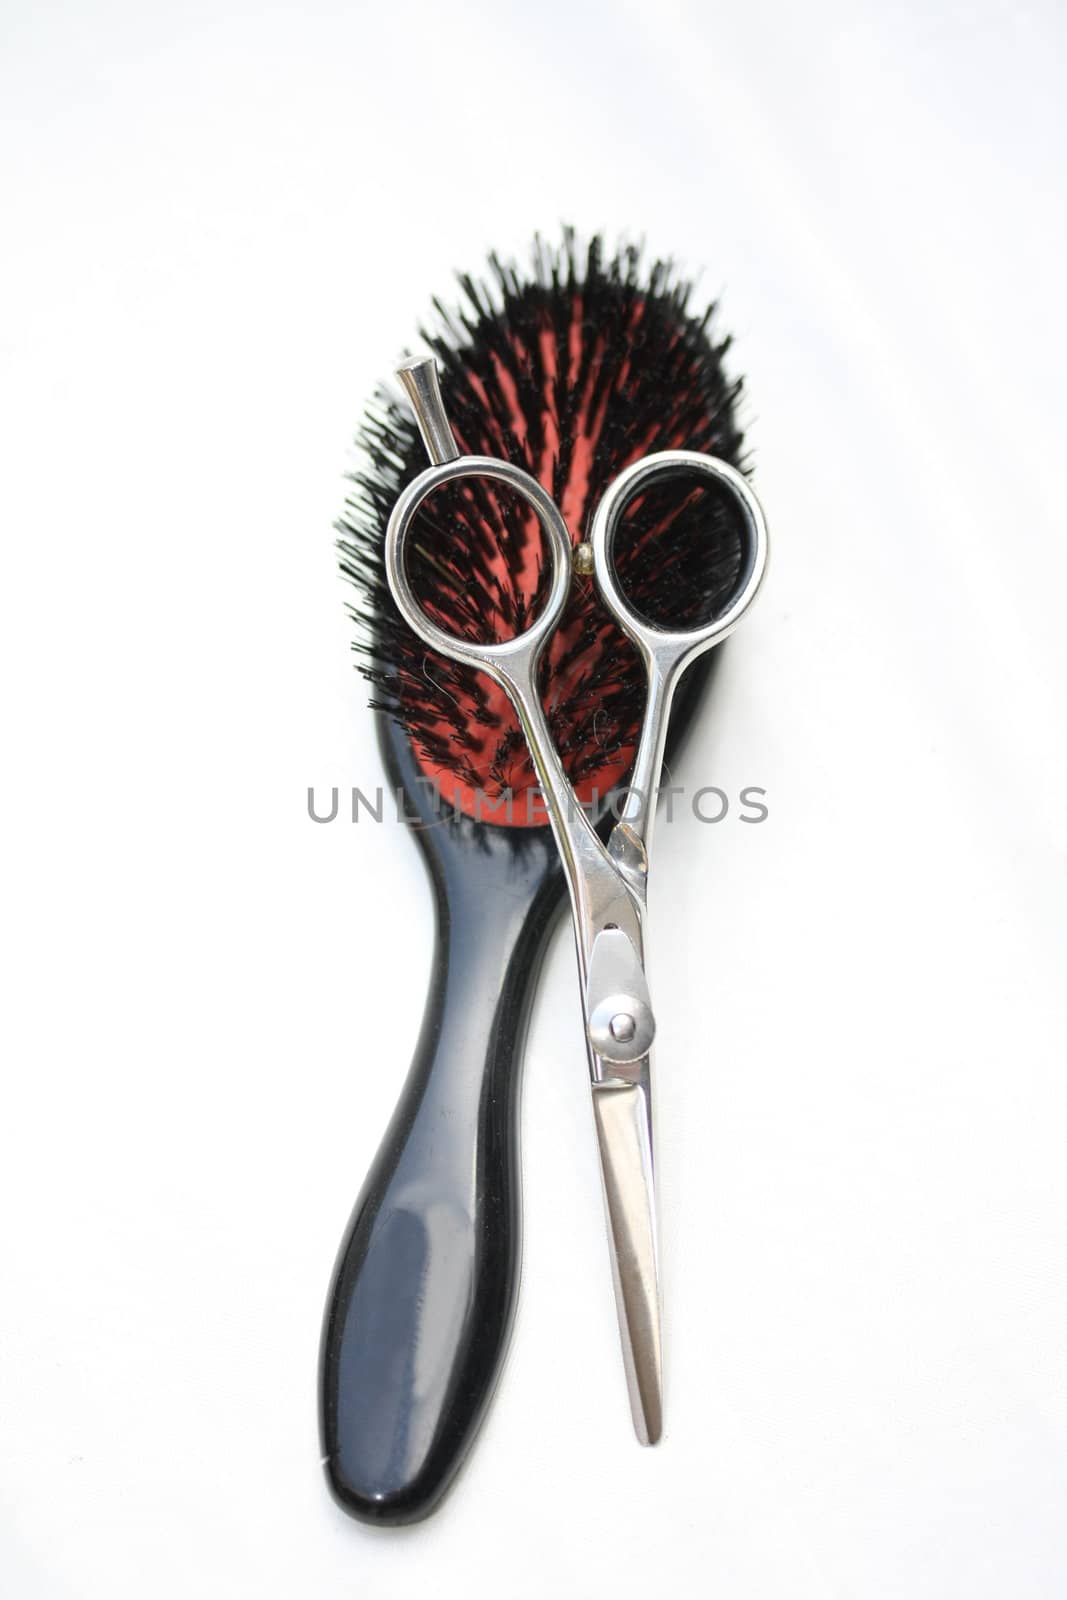 Basic Hairdressers tools - a brush and a stainless steel pair of scissors